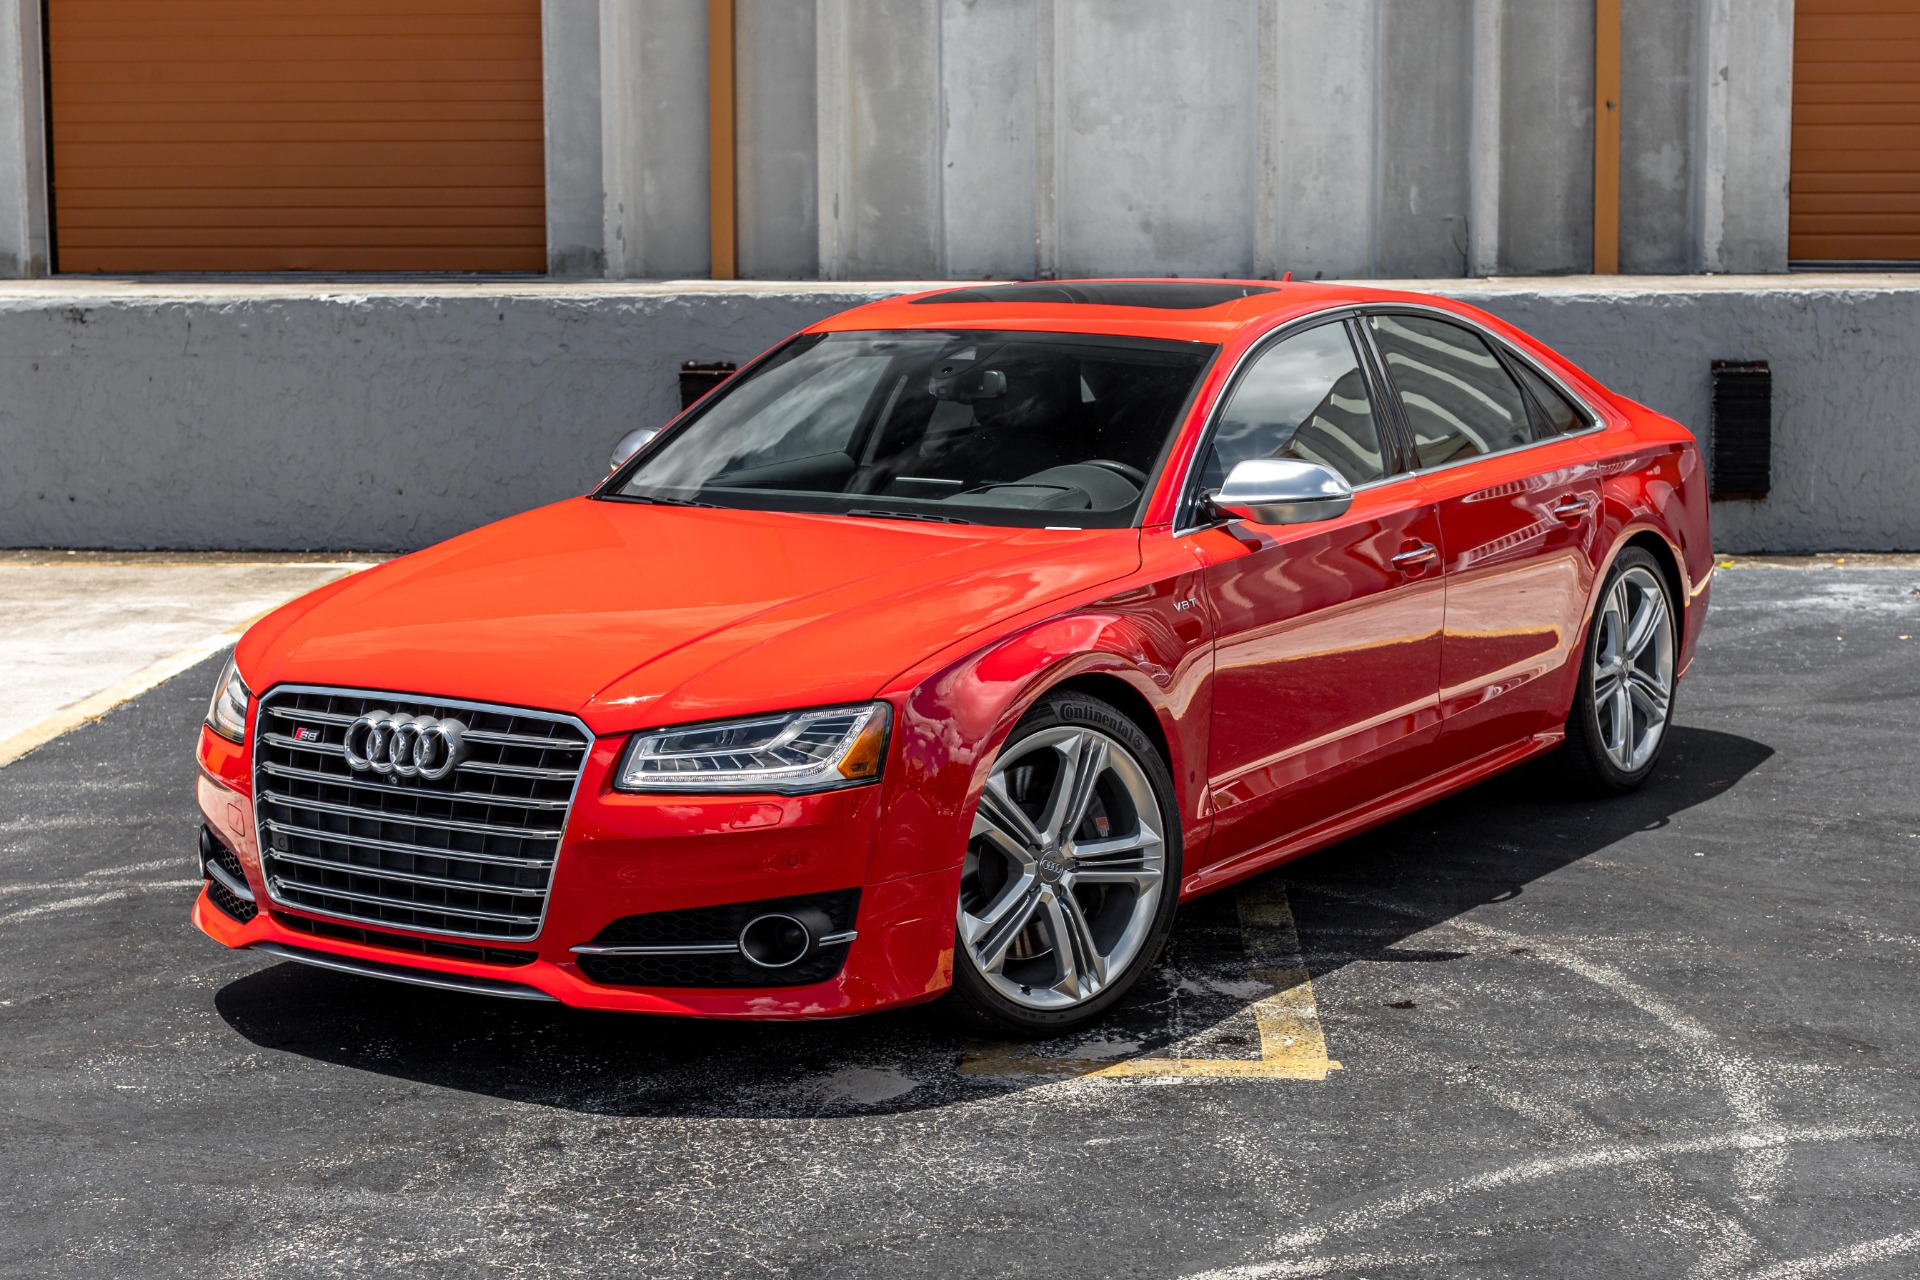 Used 2015 Audi 4.0T quattro with Audi Custom Paint, Full Leather Pack, Driver Assist For Sale (Sold) | Exotics Stock #22119